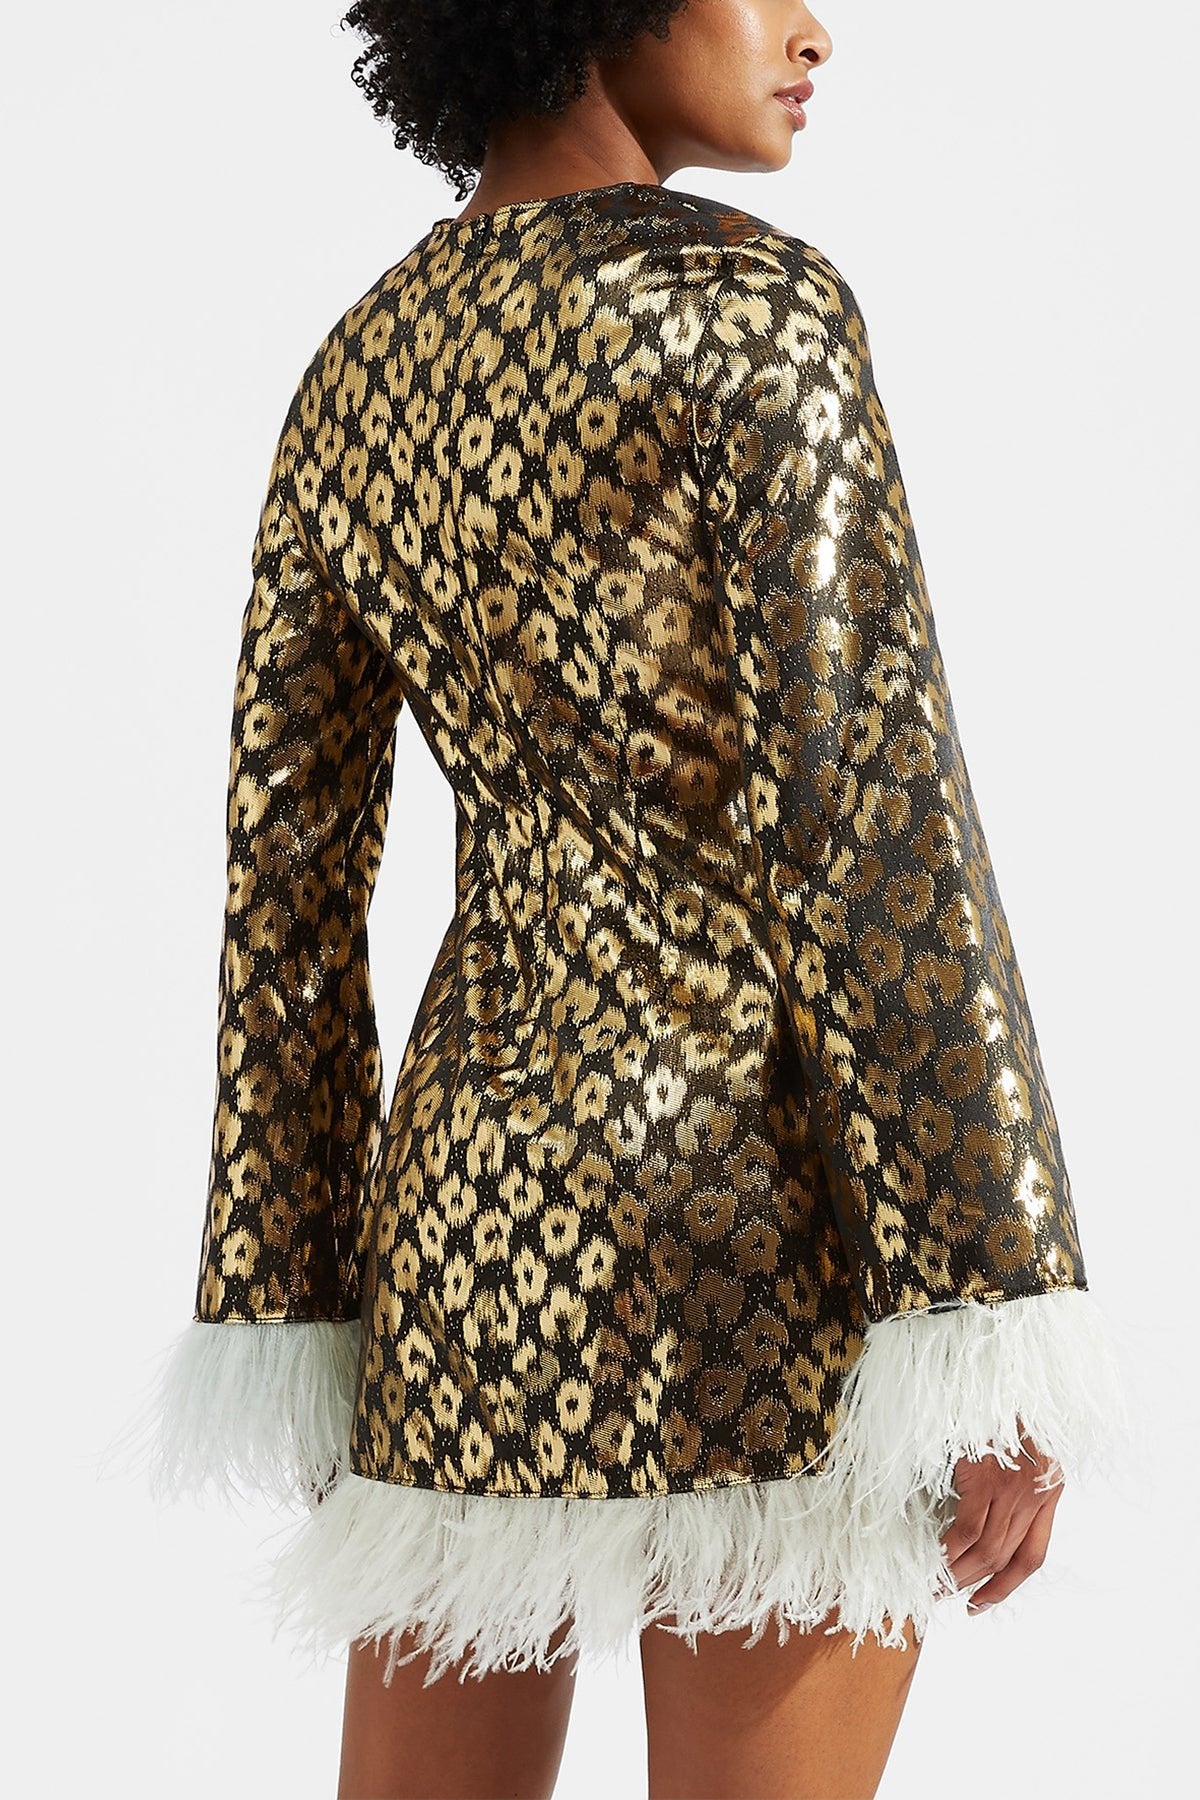 Twiggy Dress with Feathers in Leopard Chine - shop-olivia.com